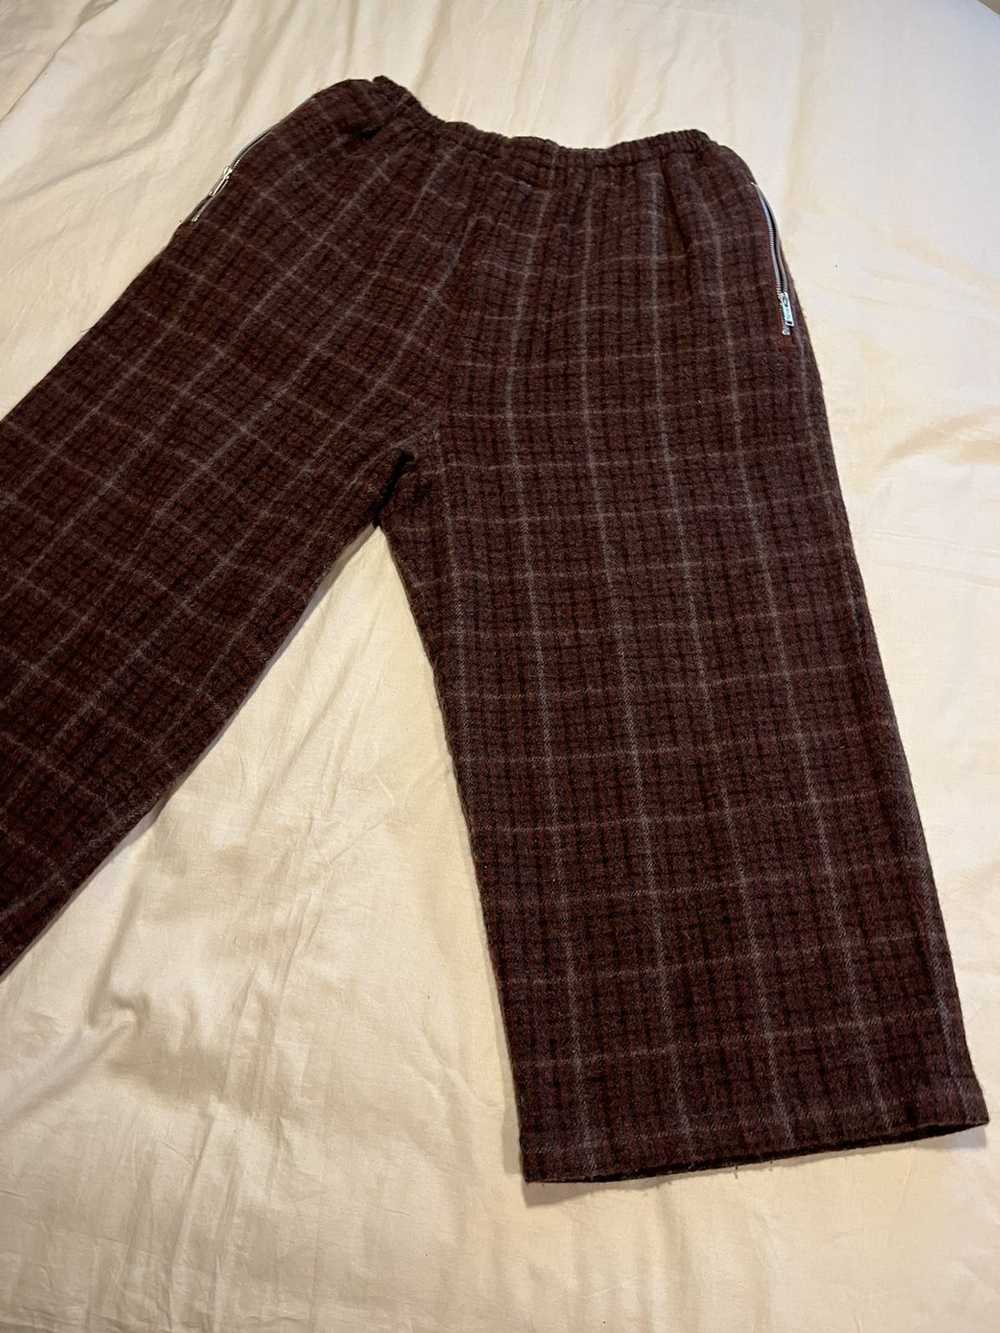 Undercover Undercover Wide leg wool pants. - image 5